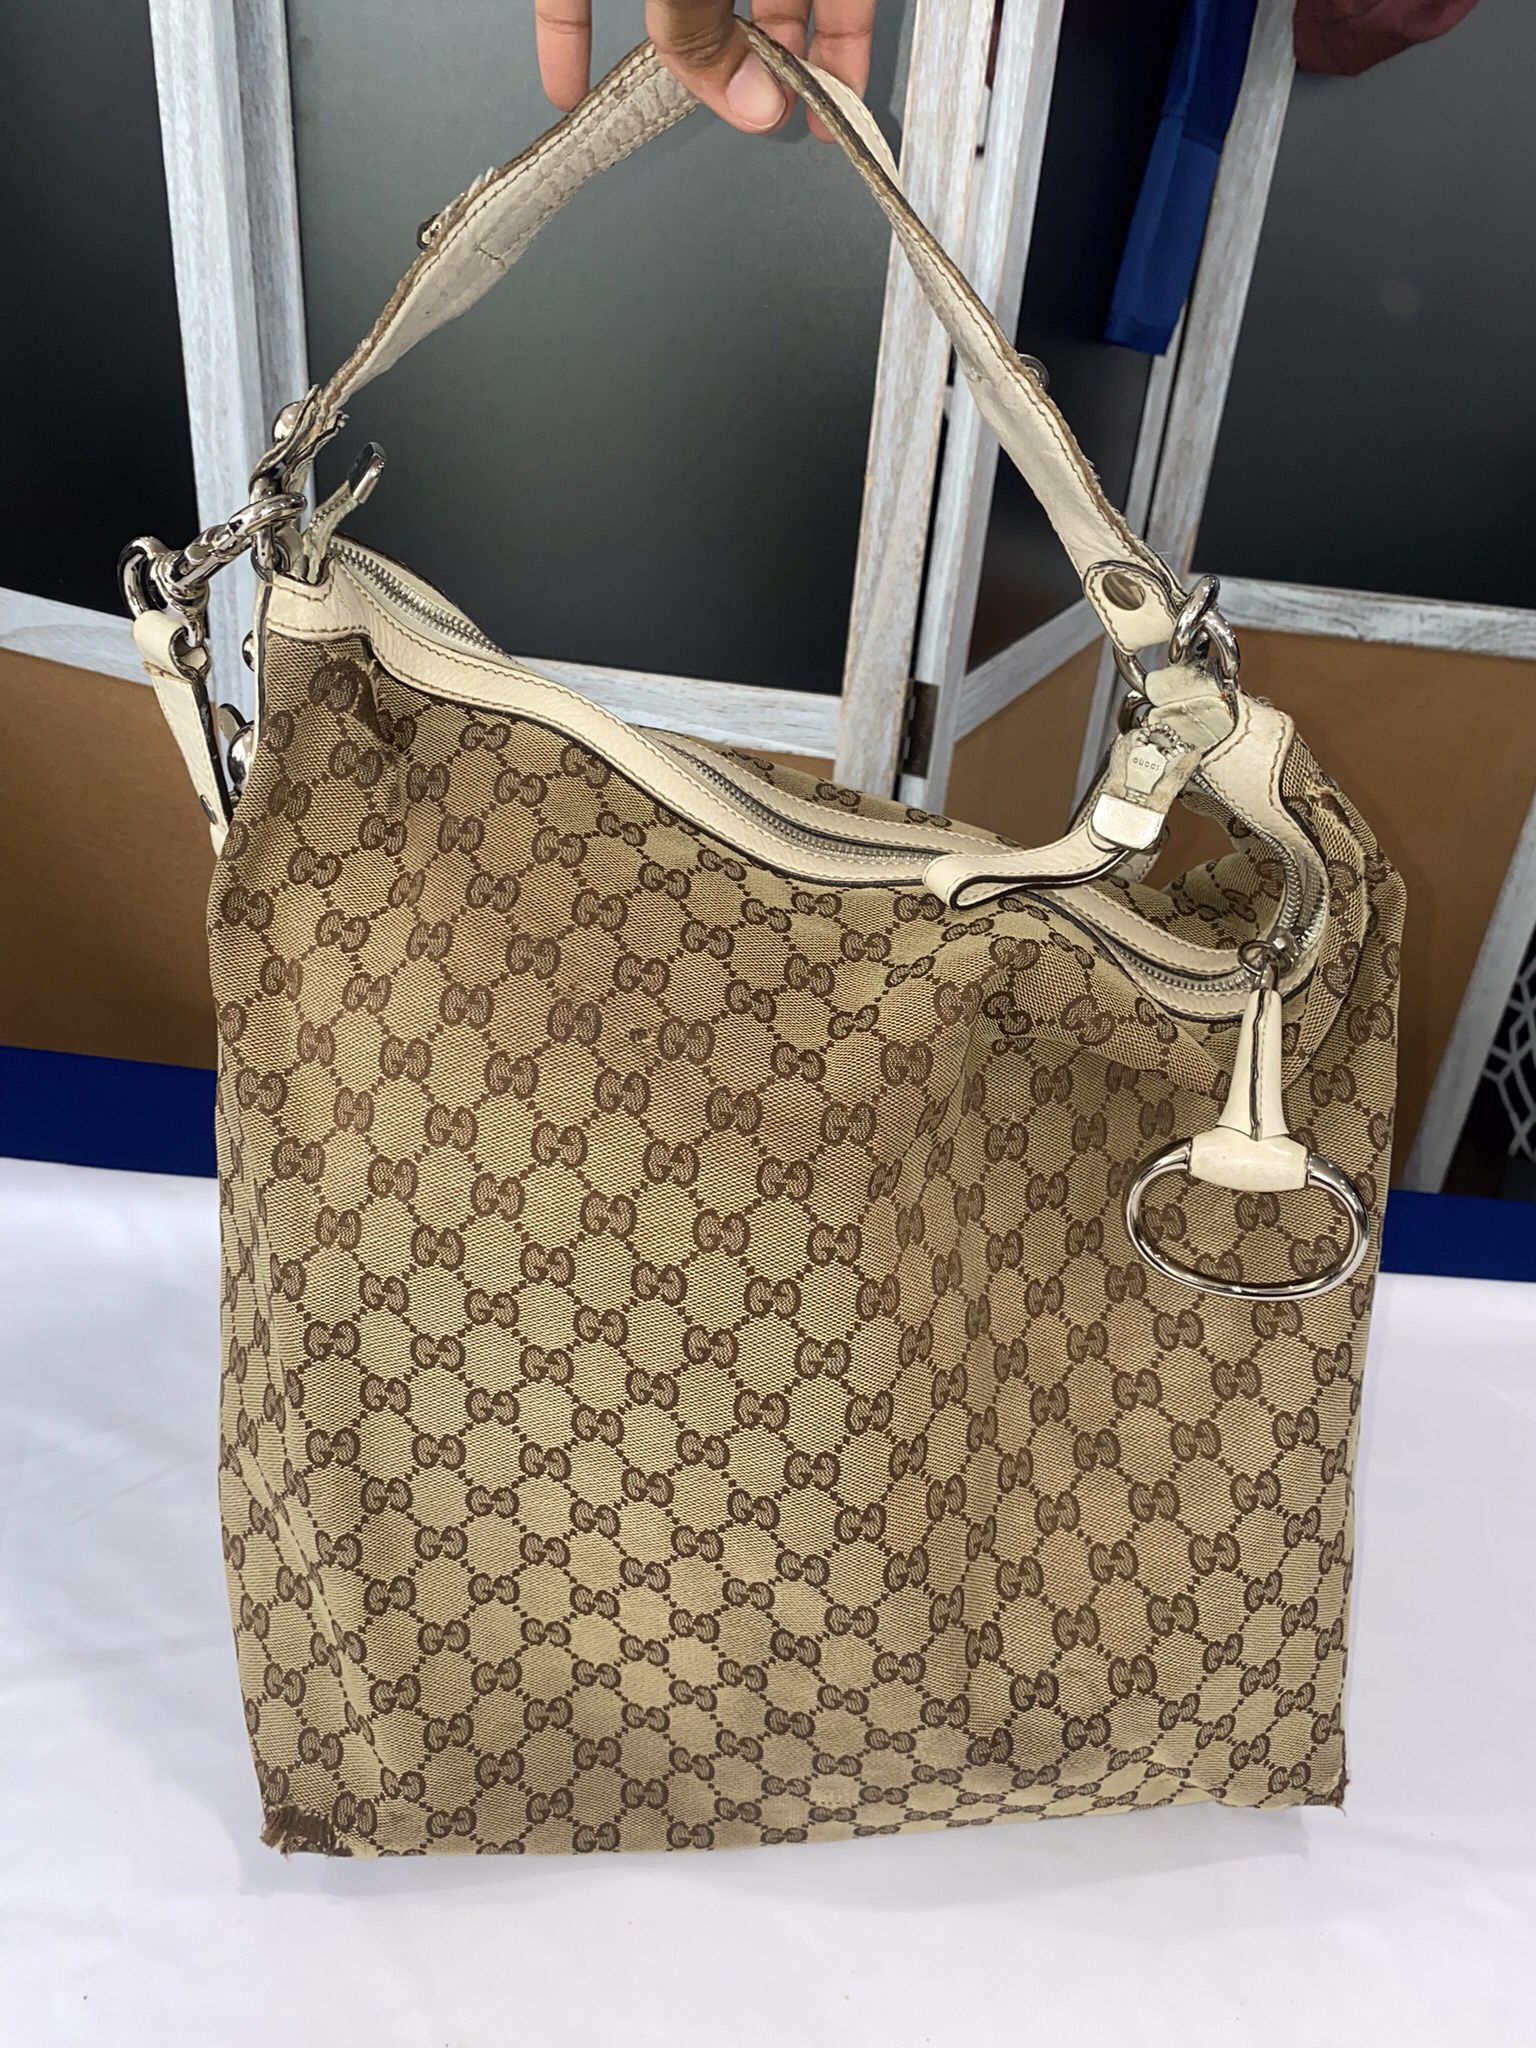 AUTHENTIC GUCCI Hobo bag 